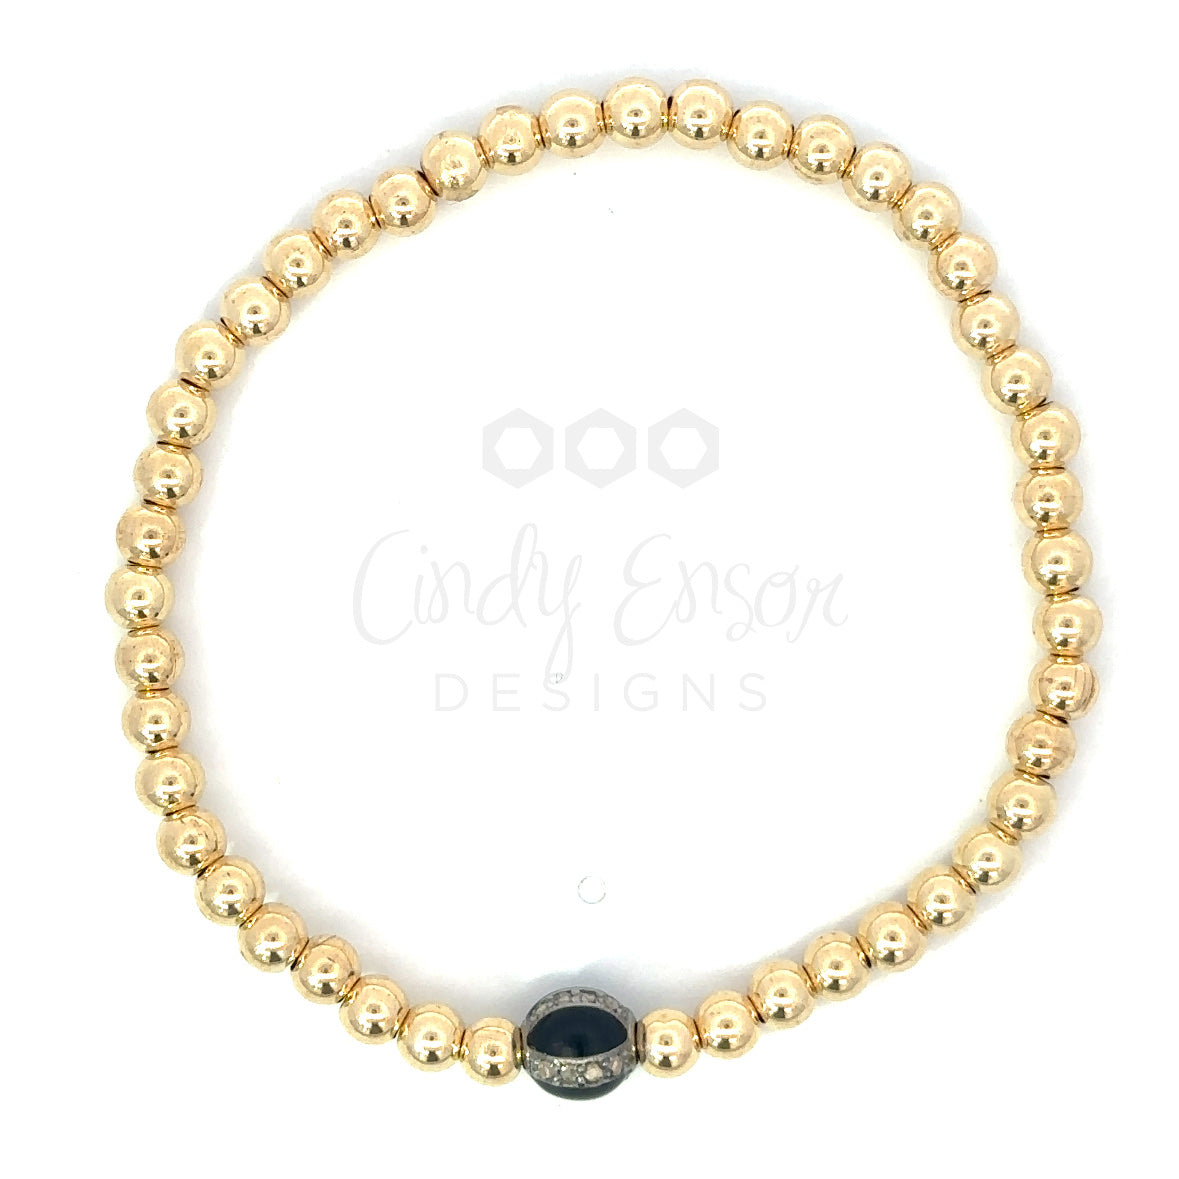 5mm Gold Filled Bead with 6mm Enamel Pave Bead Bracelet